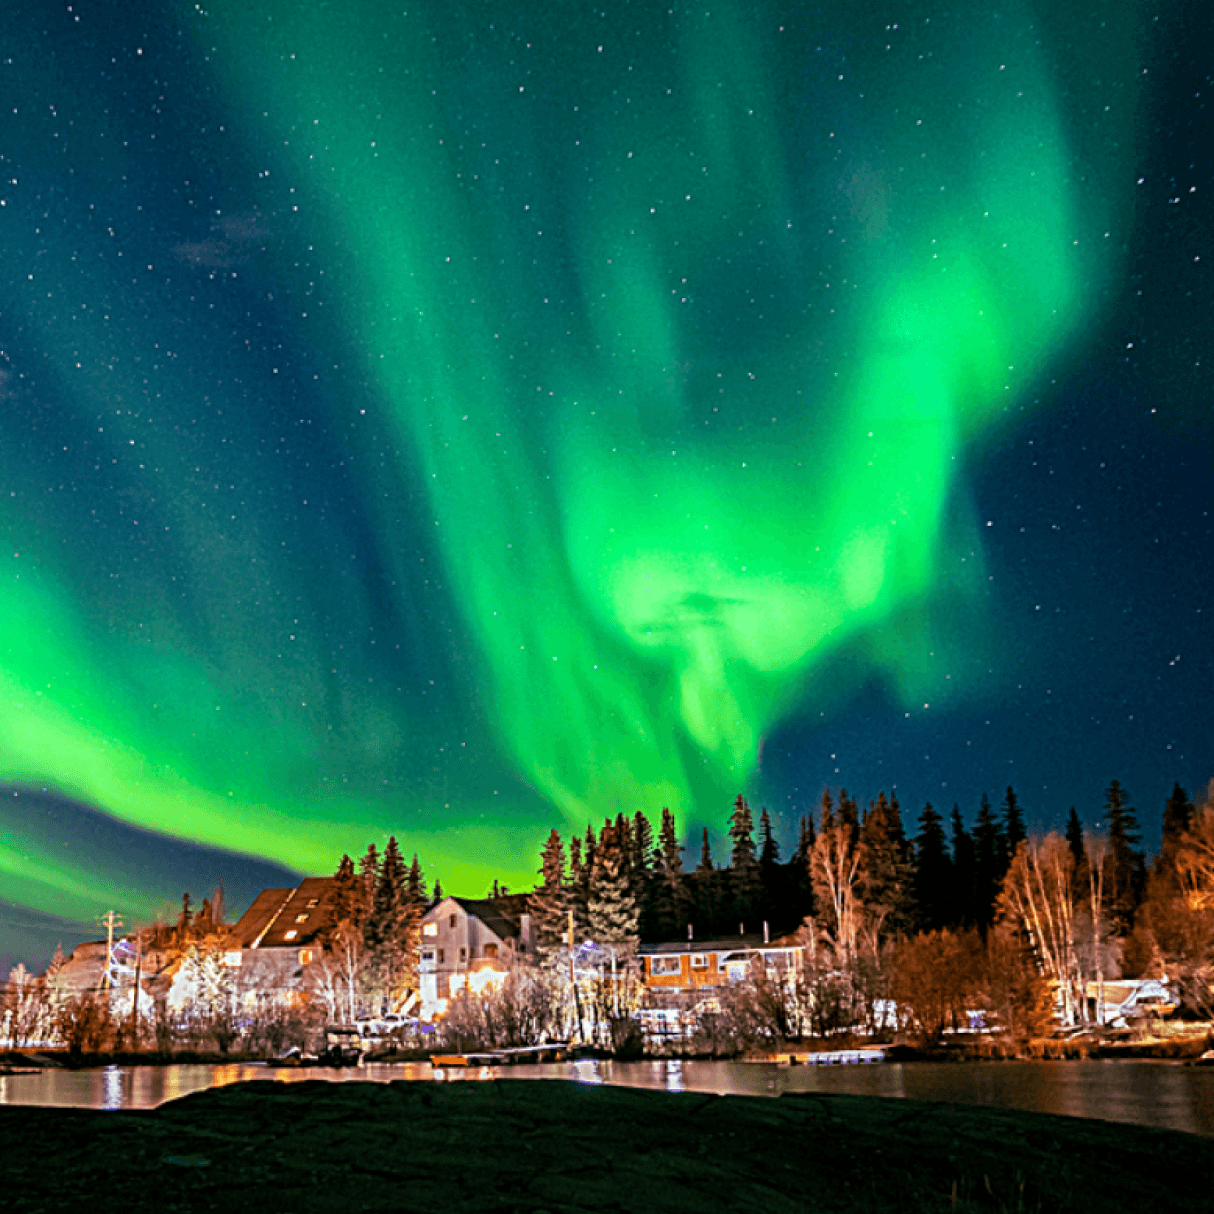 Green aurora borealis light up the night sky above a small town.